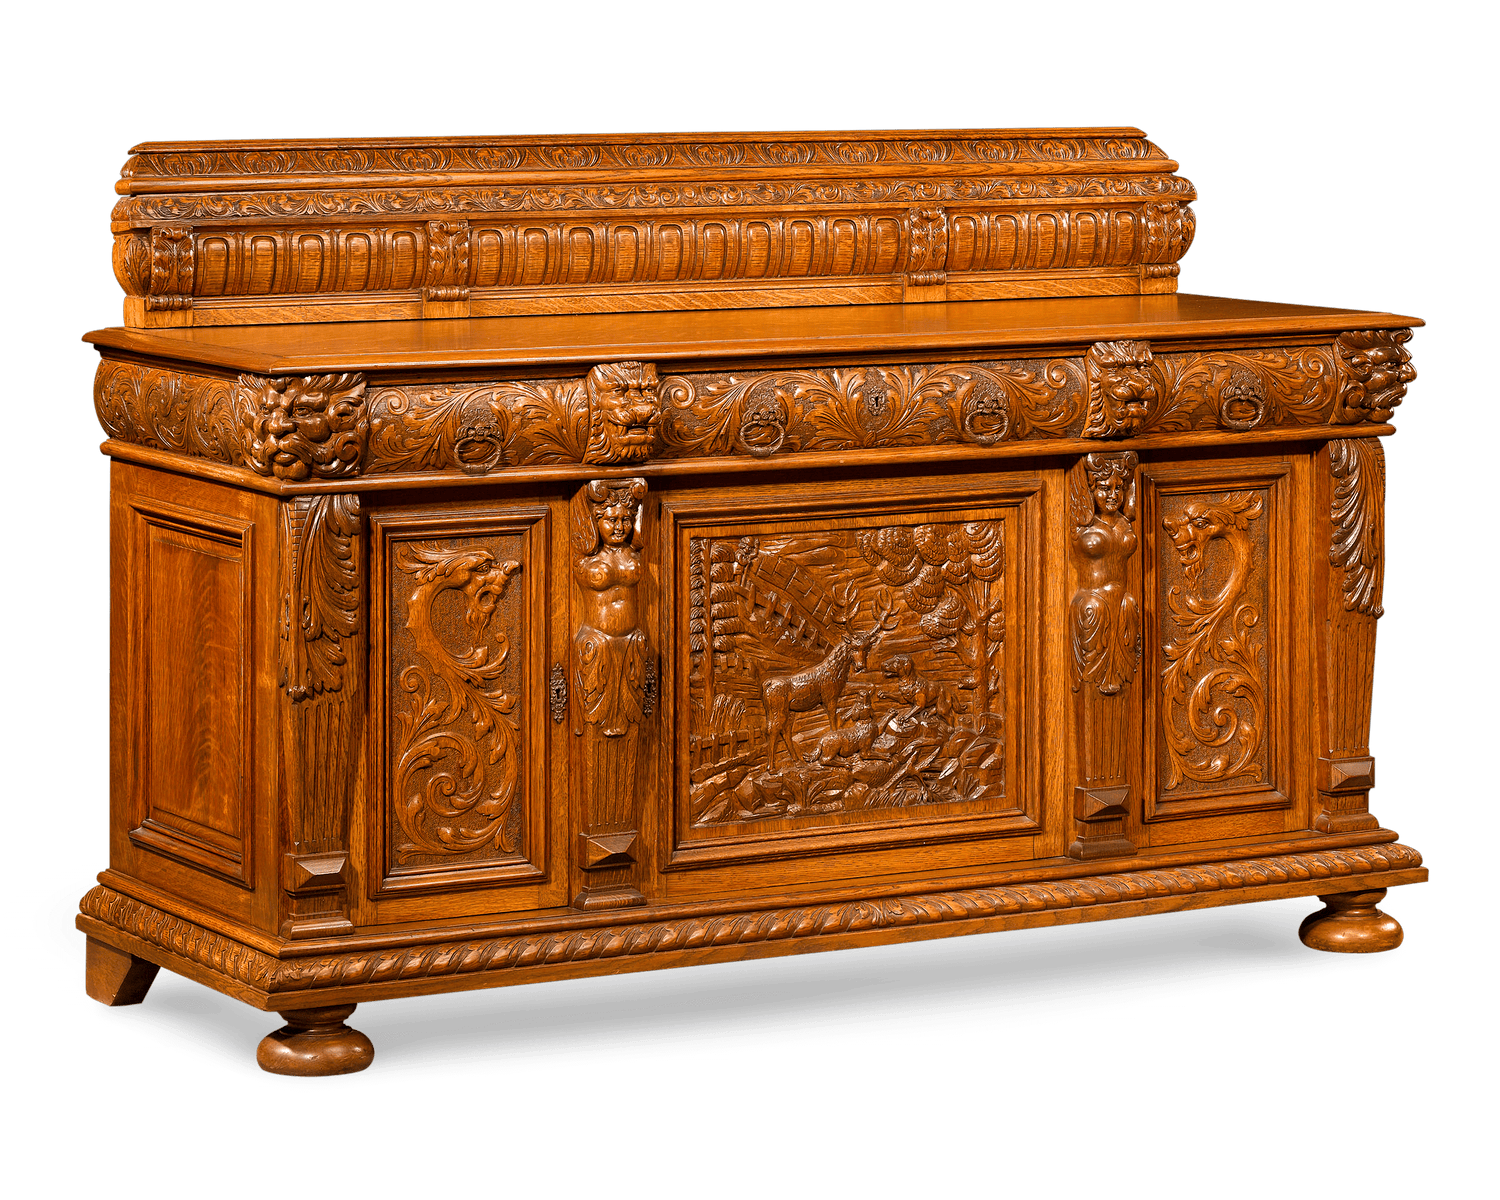 A superb carved hunt scene is the focus of this amazine sideboard